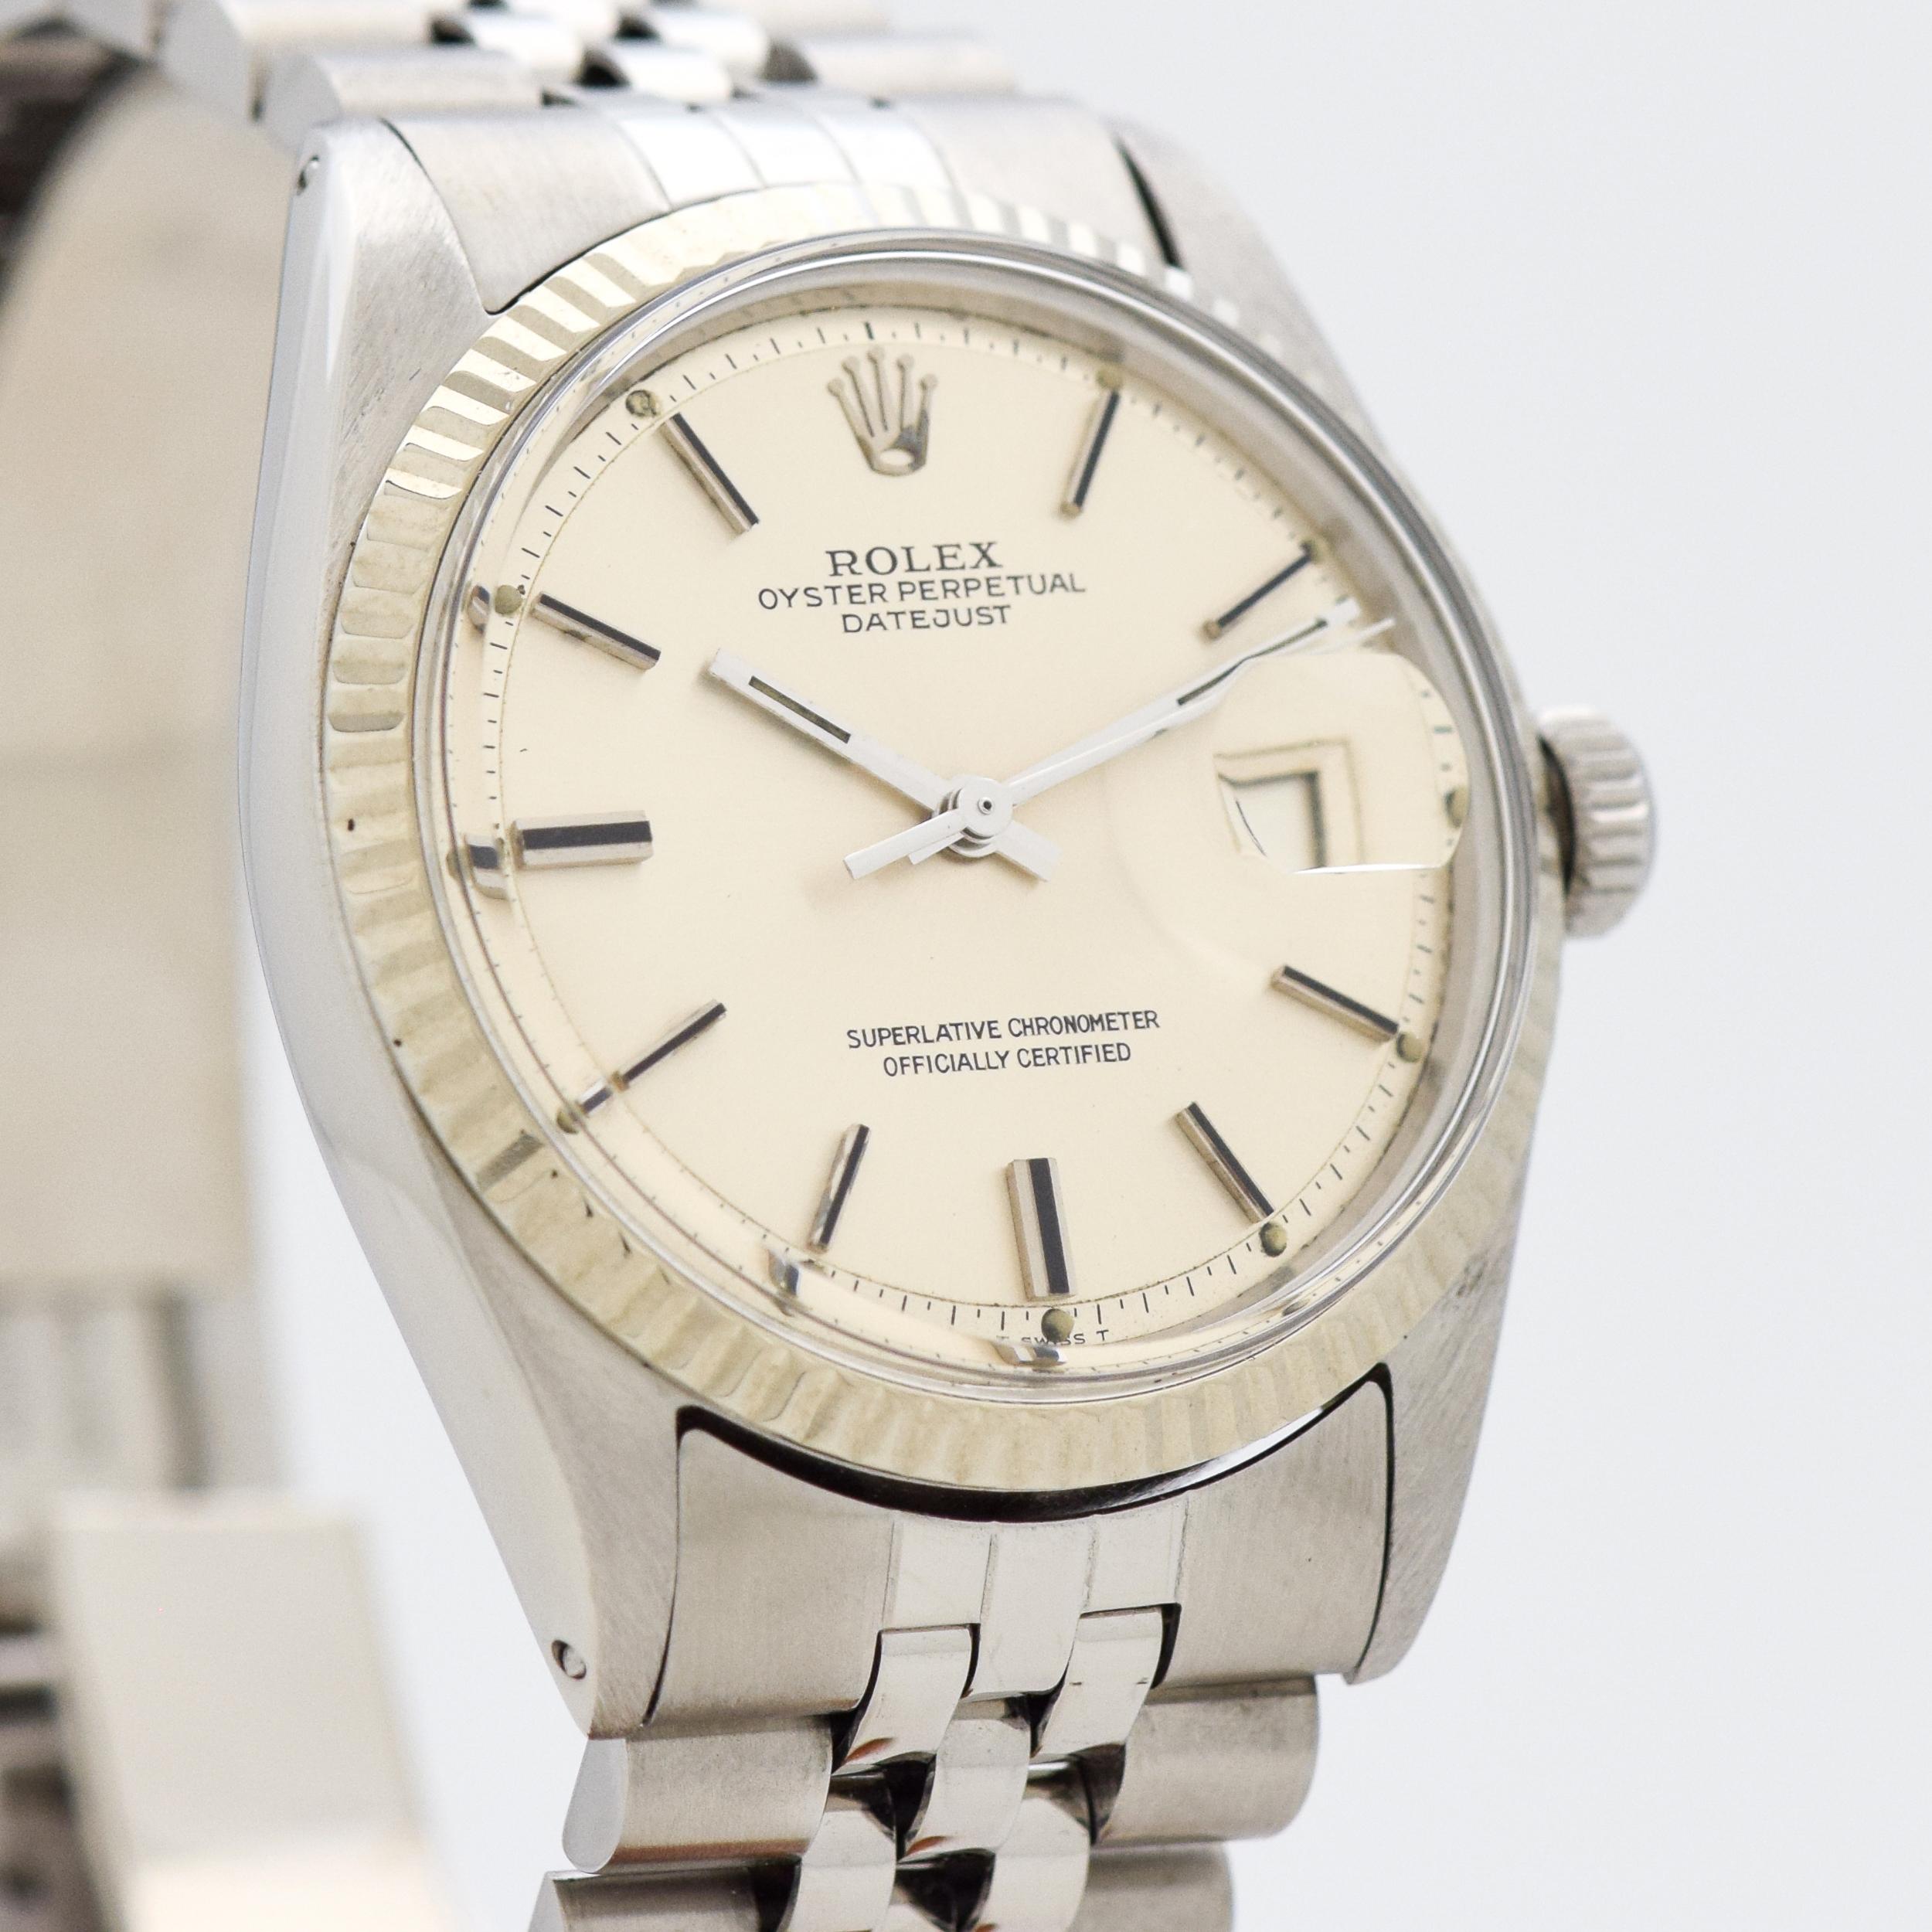 1977 Vintage Rolex Datejust Ref. 1601 14k White Gold Fluted Bezel and Stainless Steel watch with Original Silver Dial with Applied Steel Beveled Stick/Bar/Baton Markers with Black Inlay with Original Rolex Stainless Steel Jubilee Bracelet. 36mm x